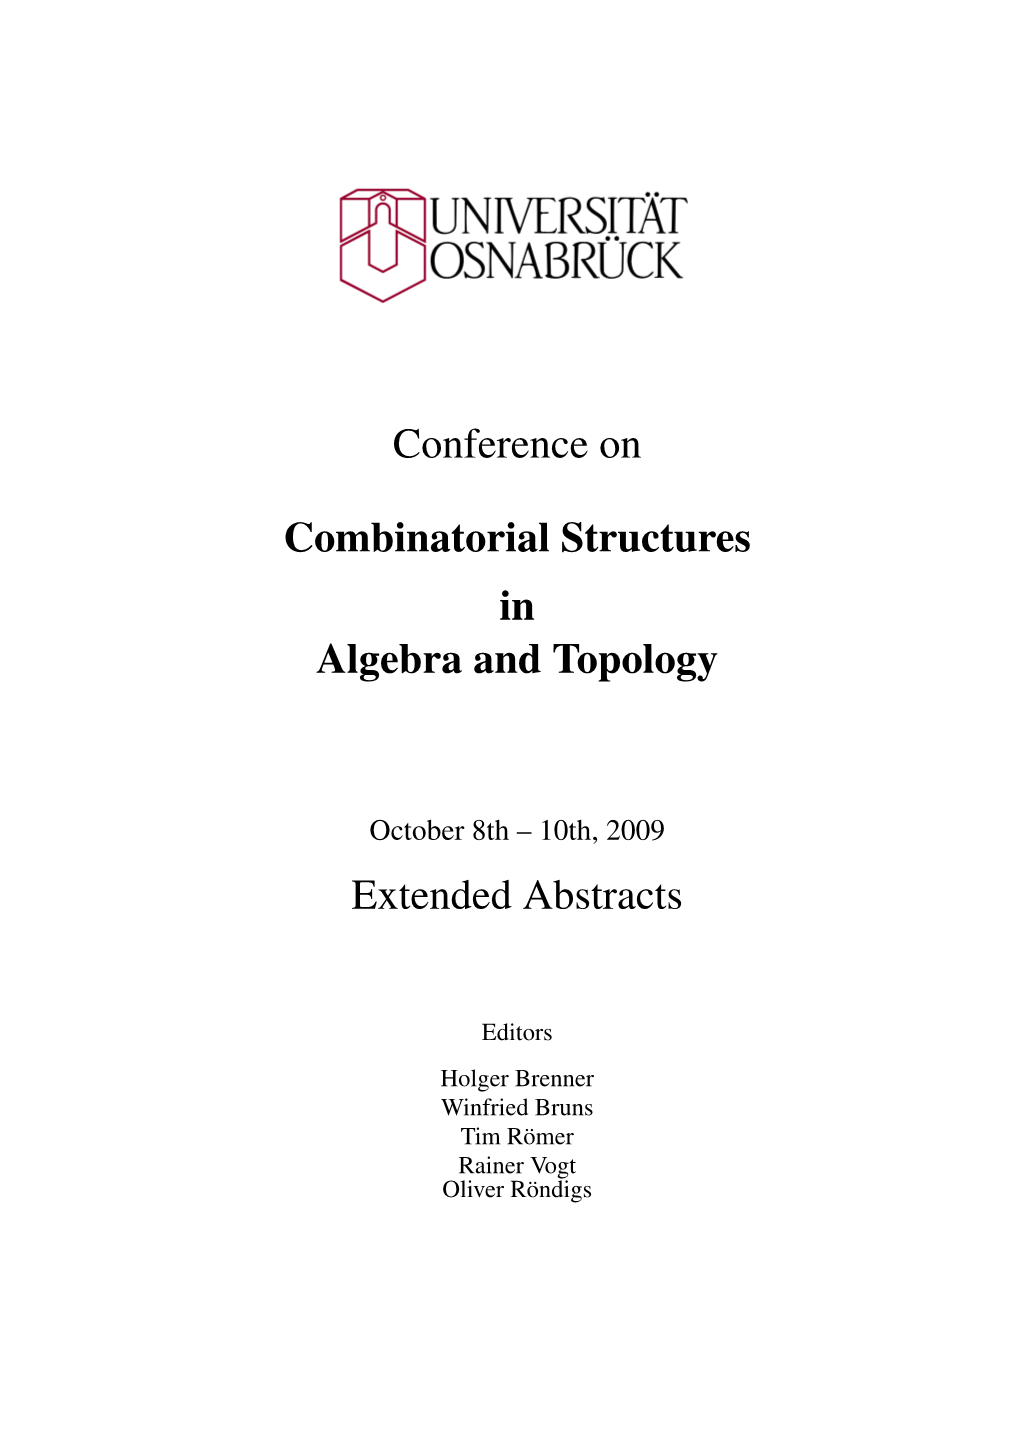 Conference on Combinatorial Structures in Algebra and Topology Extended Abstracts